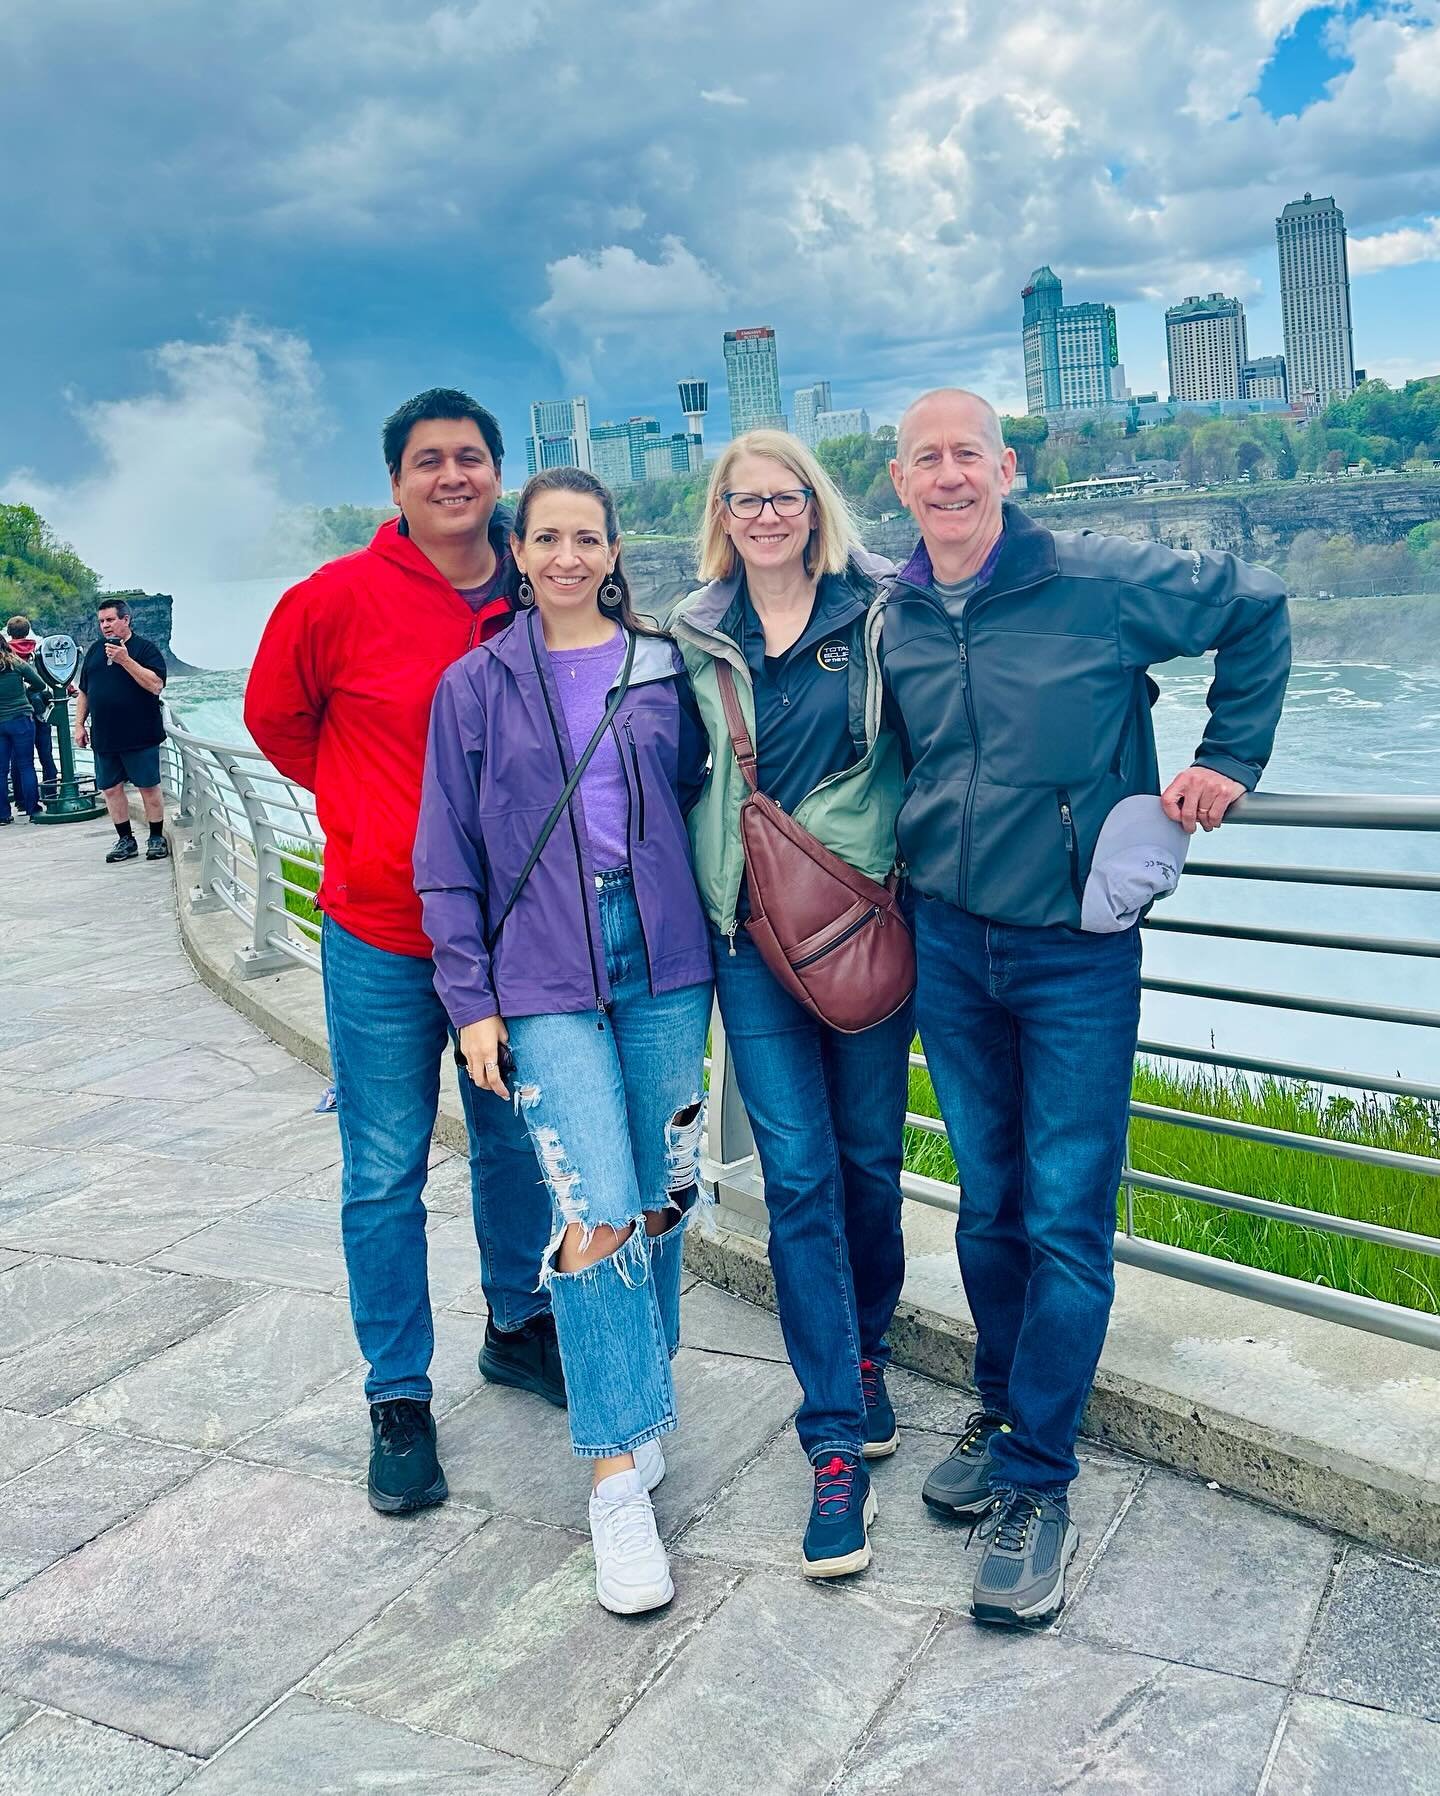 An amazing week working remotely, seeing my aunt and uncle, my brother and sister in law and the beauty of upstate New York for the first time. Allan, Heidi, Alex, Chelsie - thanks for the hospitality, laughs, and great food! 🤩🤩🤩